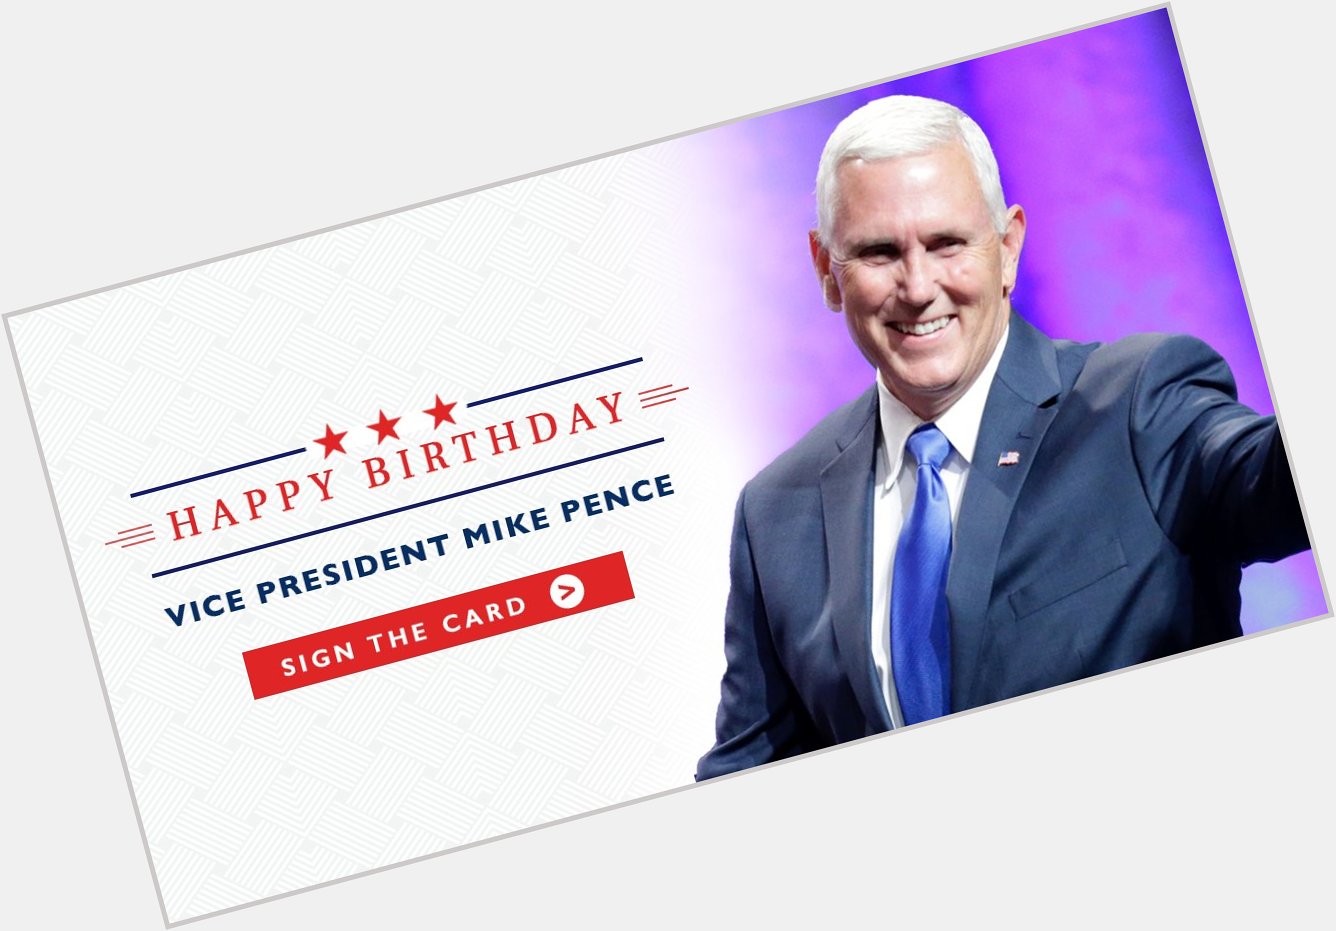 Our is celebrating a birthday tomorrow--sign the card to wish him well!  